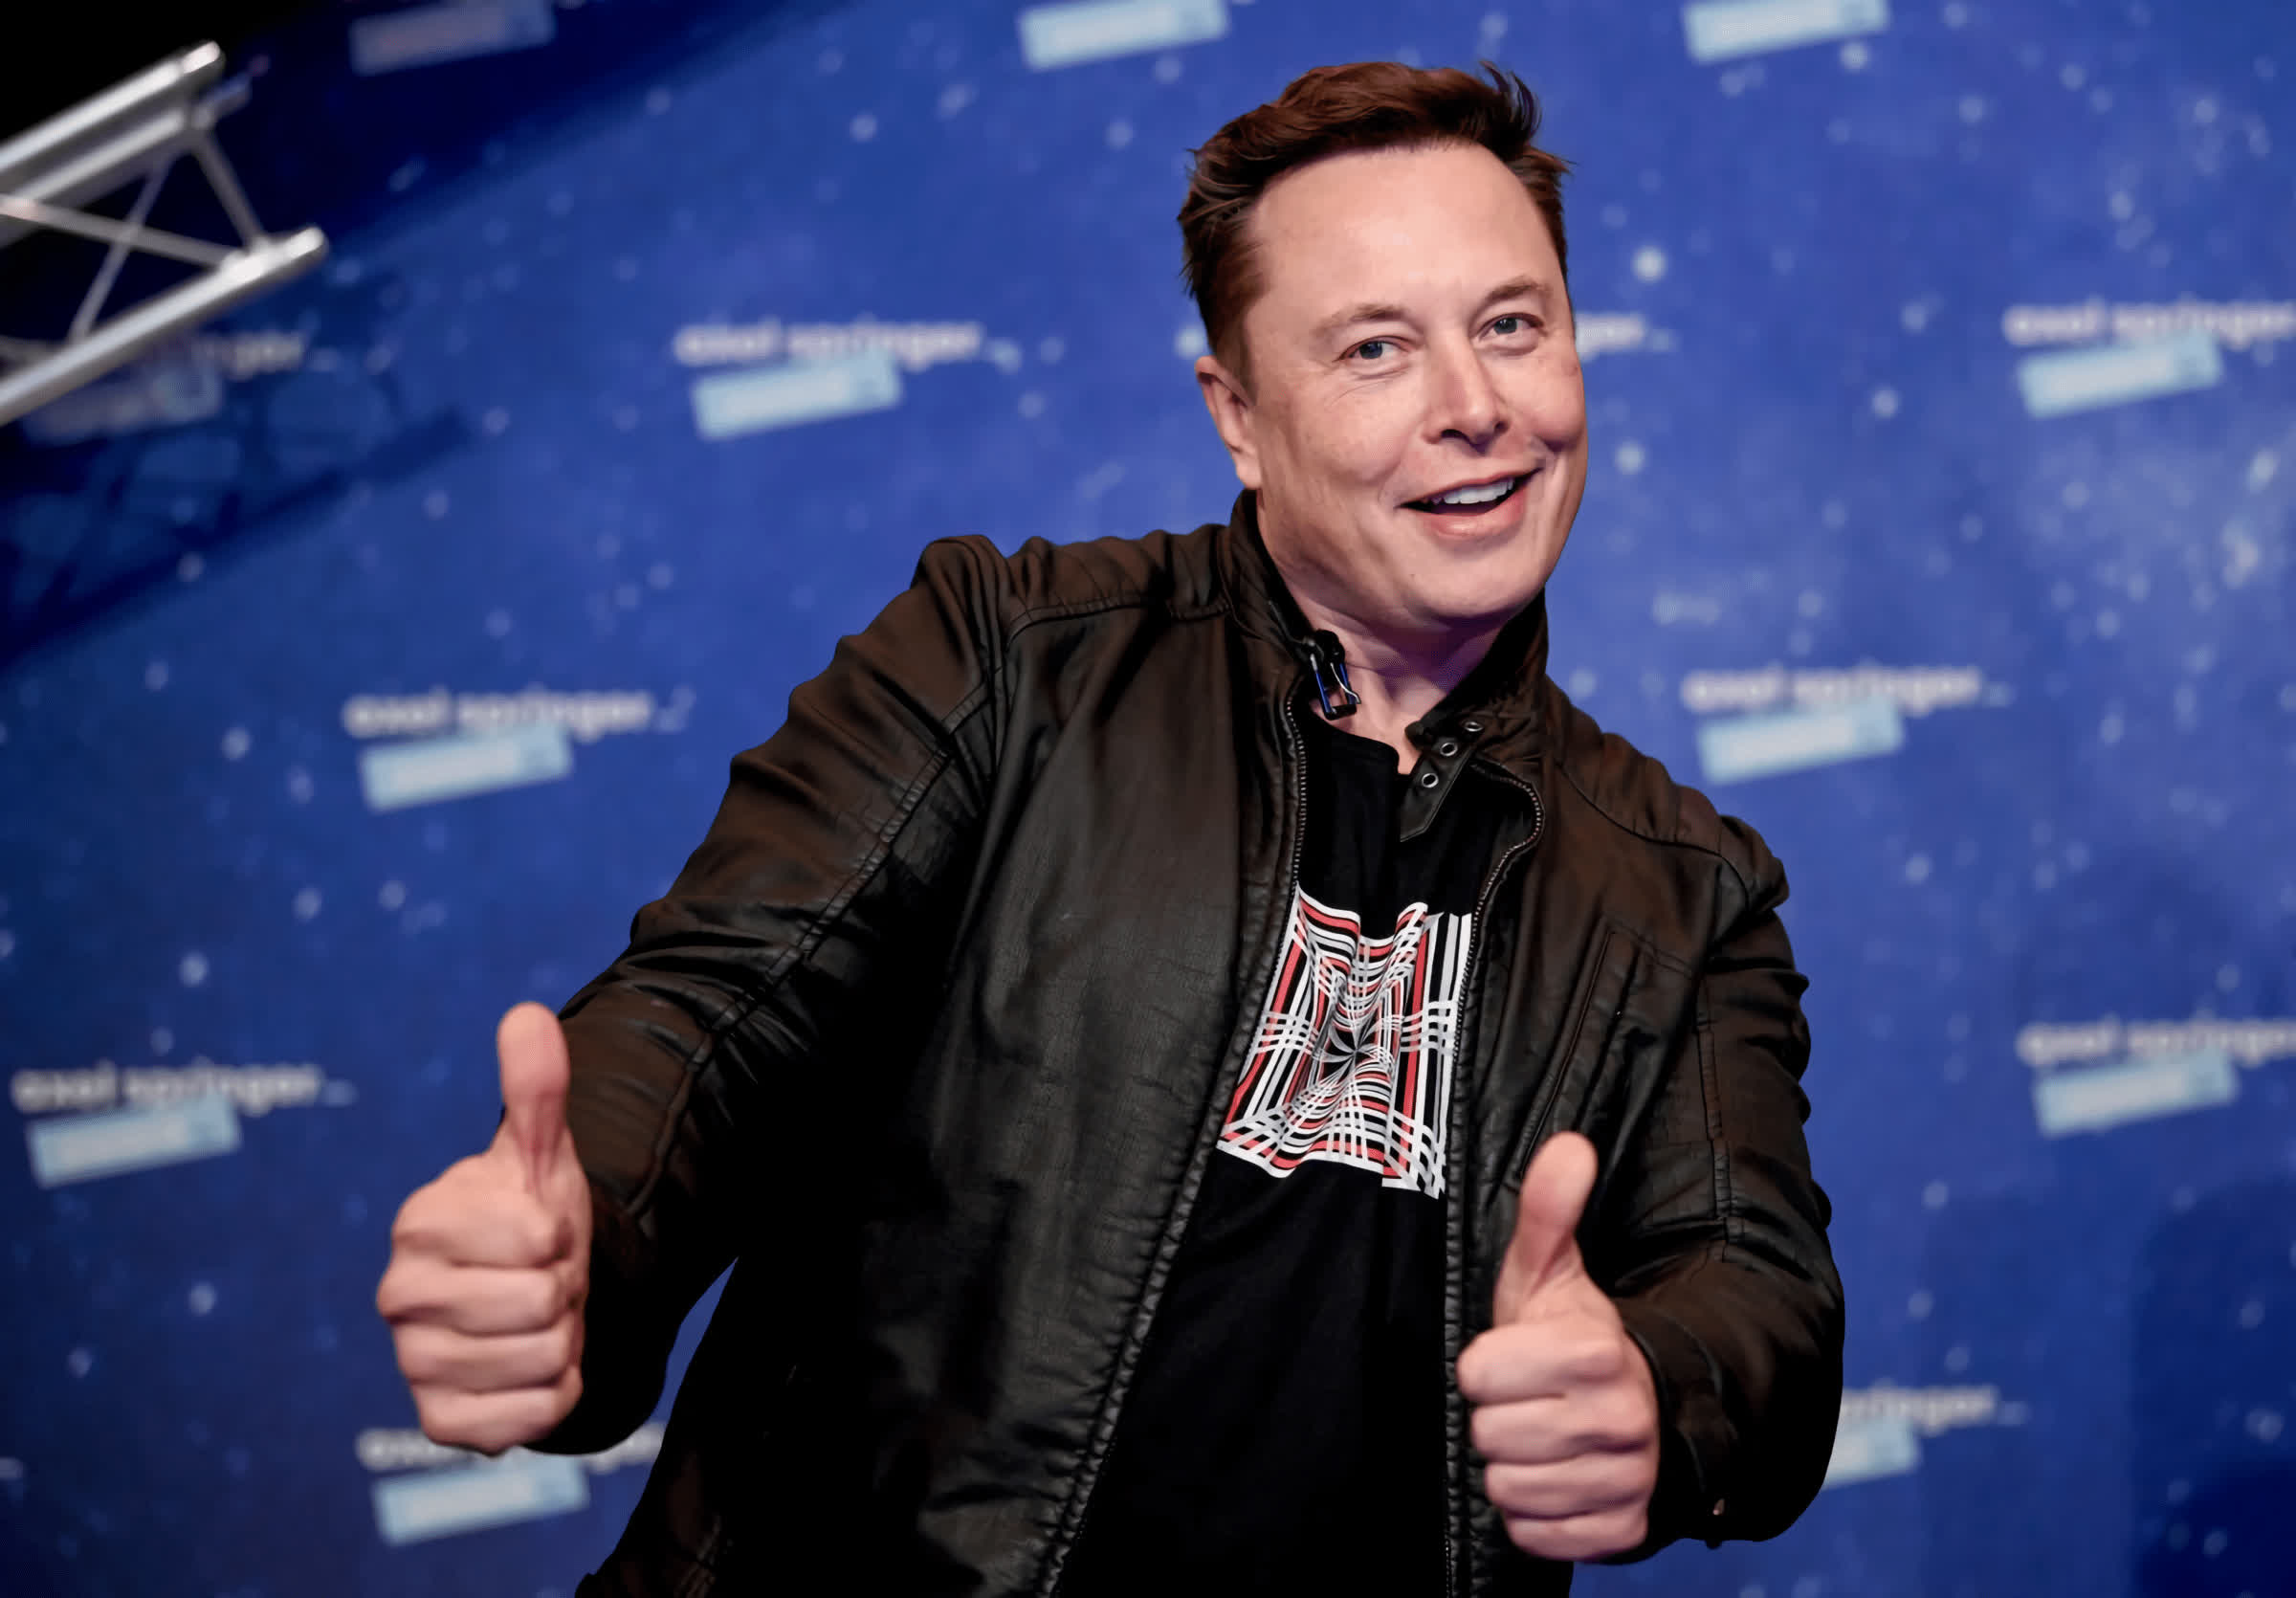 Elon Musk secretly fathered twins with top Neuralink executive last year